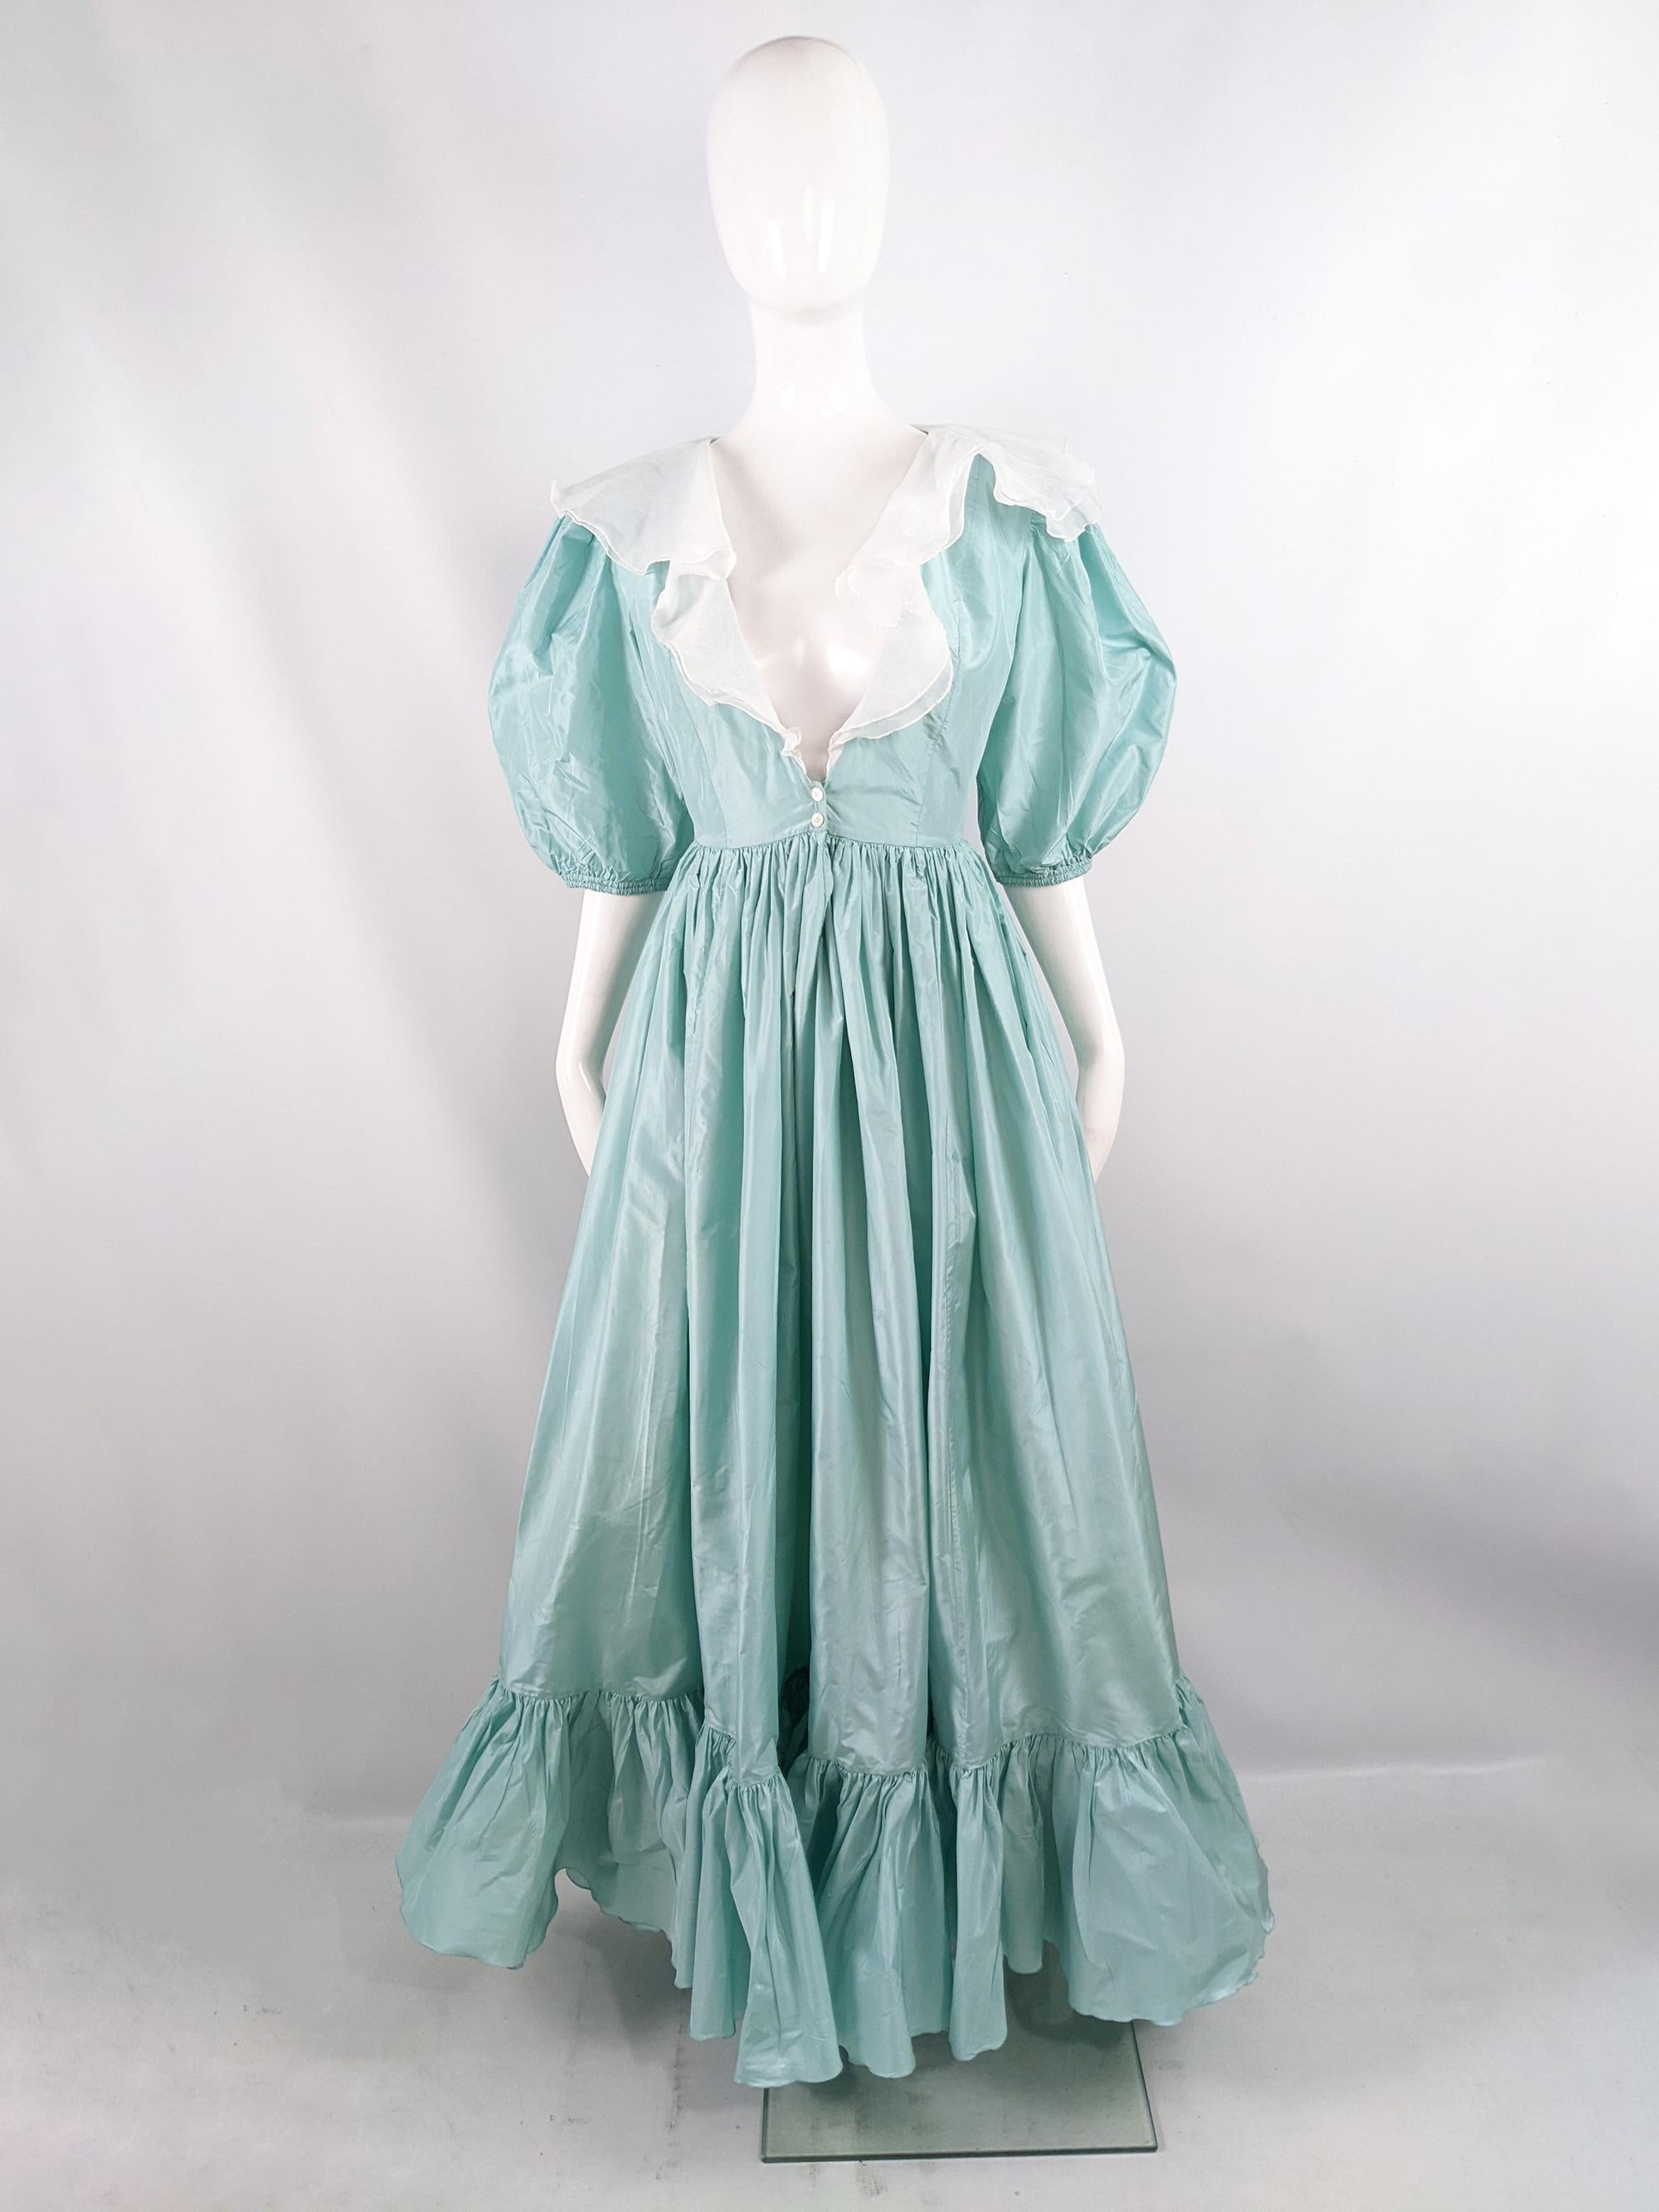 An absolutely incredible vintage womens evening dress from the 80s by luxury French-born fashion designer, Catherine Walker (a favourite of Princess Diana - who she designed over 1000 dresses for) for her Chelsea Design Company label. In a pastel